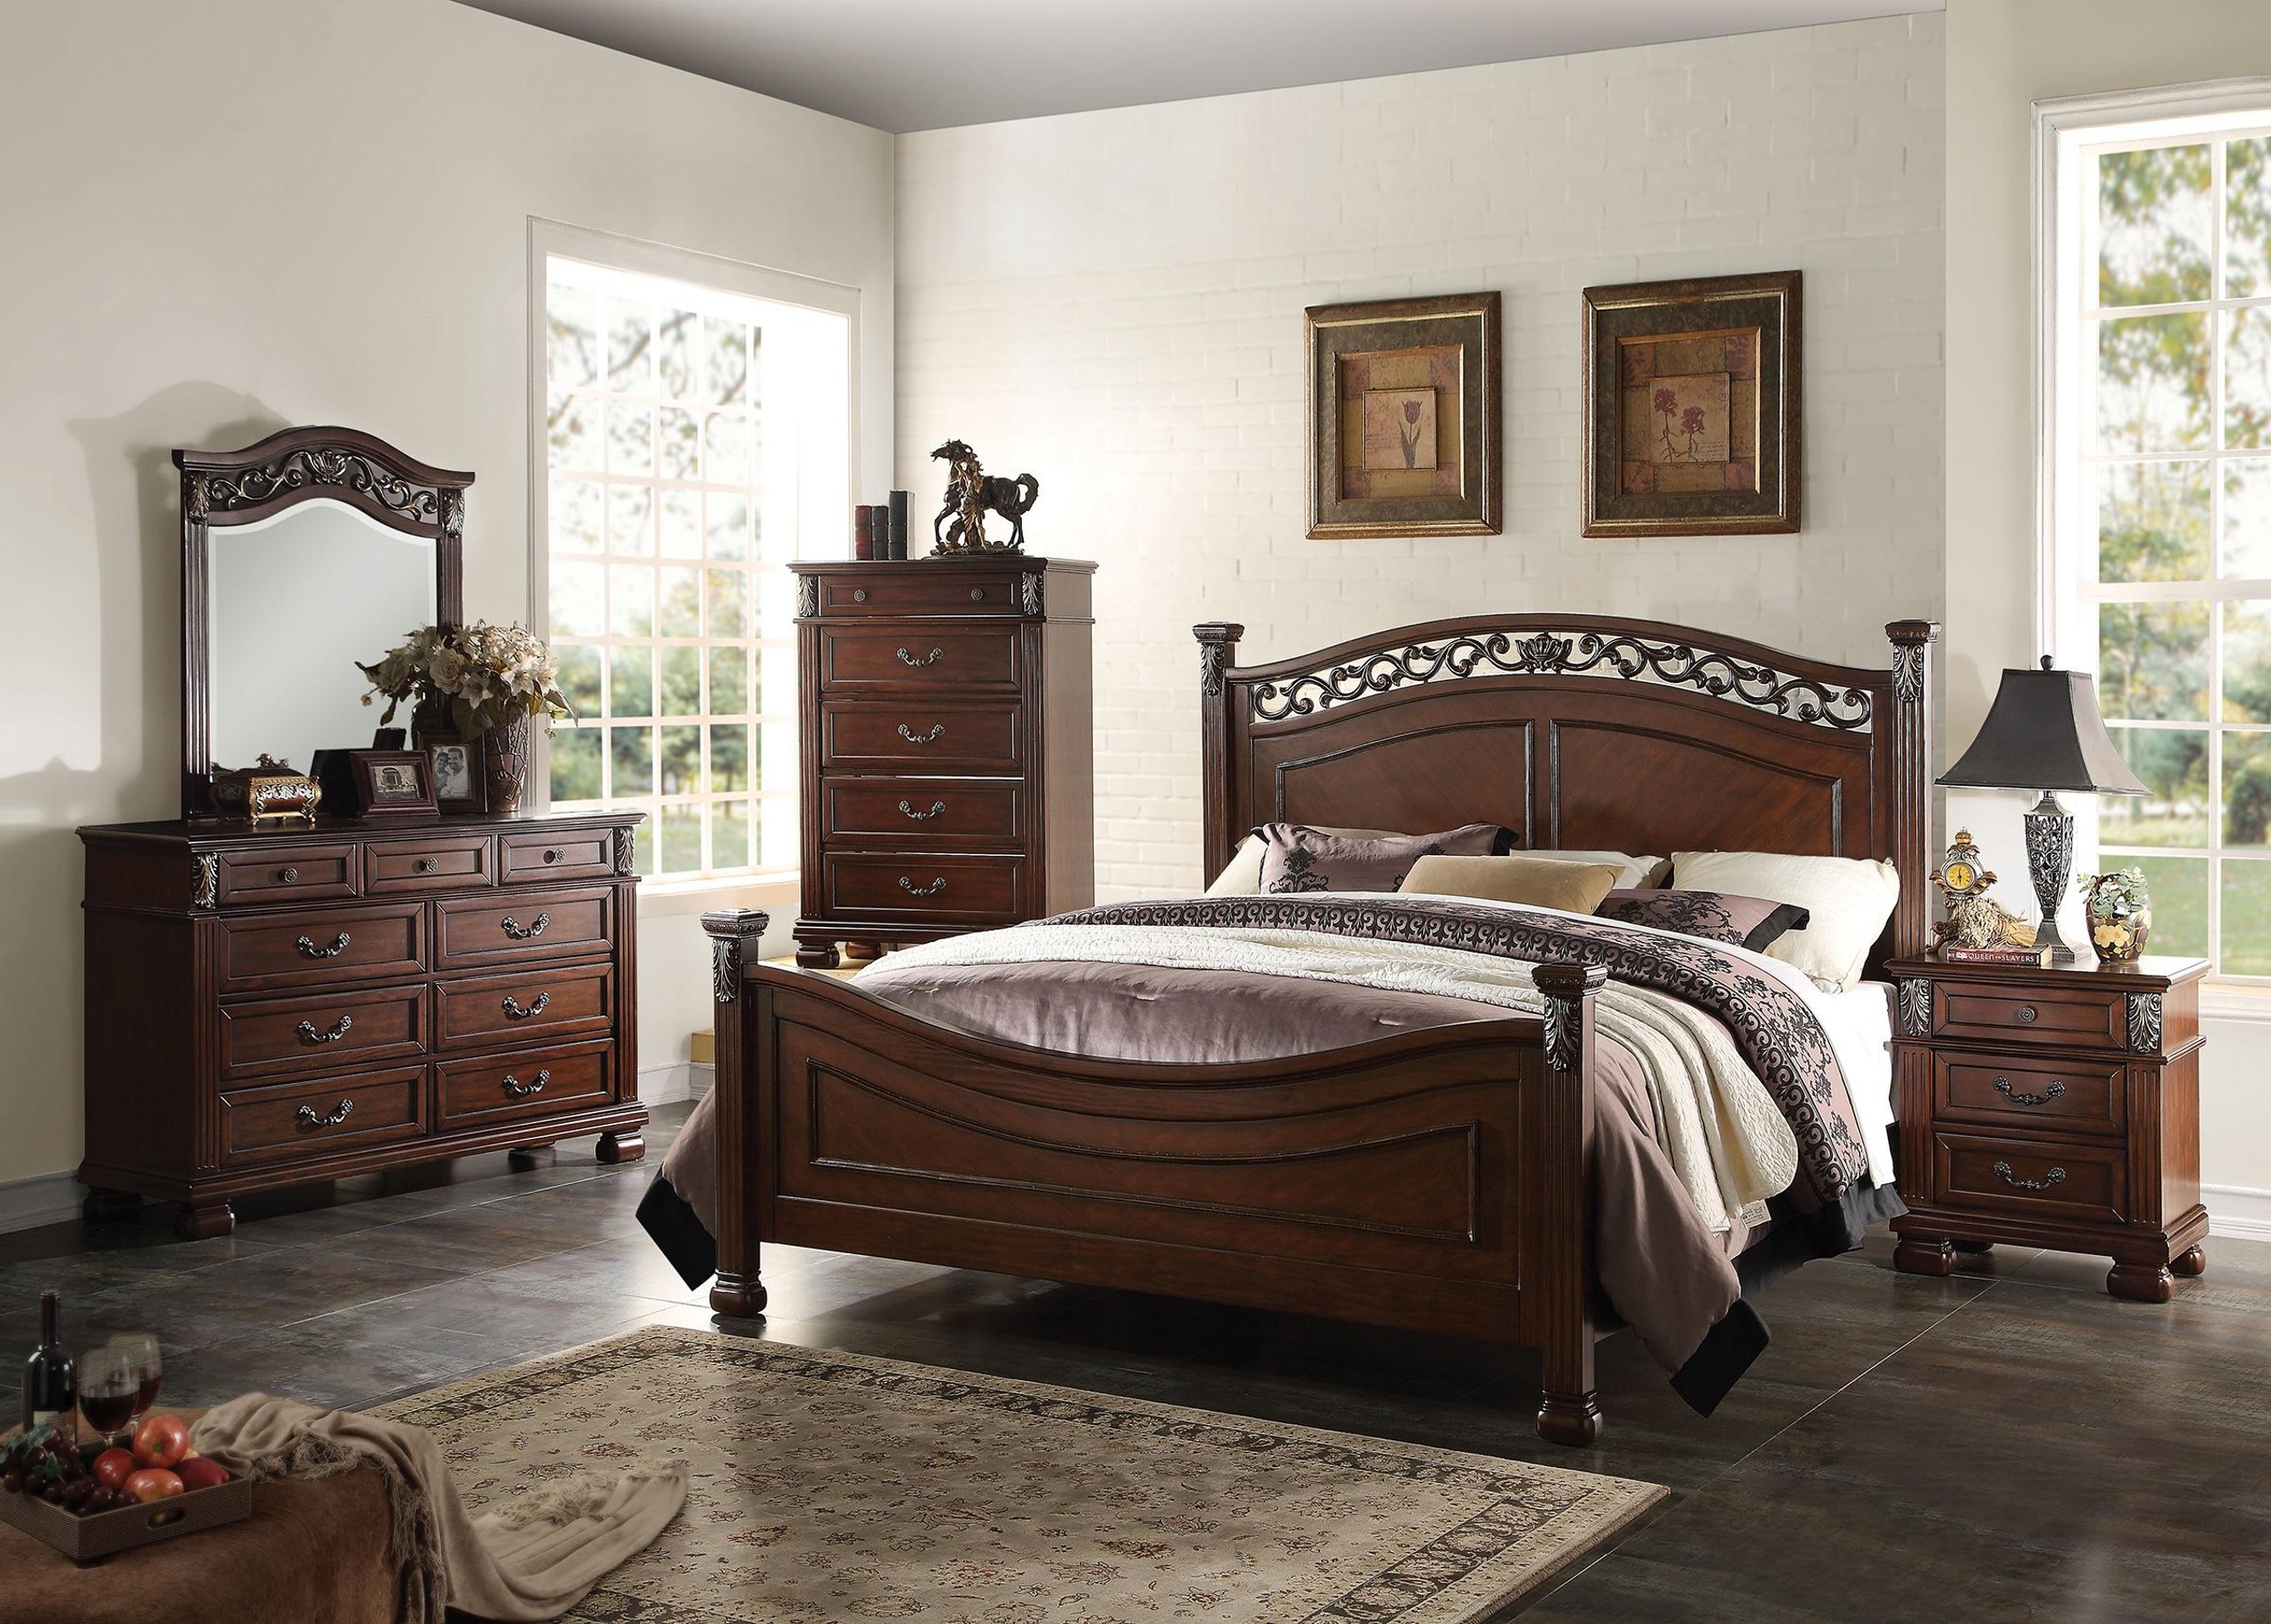 Dark Walnut Queen Bedroom Set 4pcs Manfred 22770q Acme Traditional Buy Online On Ny Furniture 